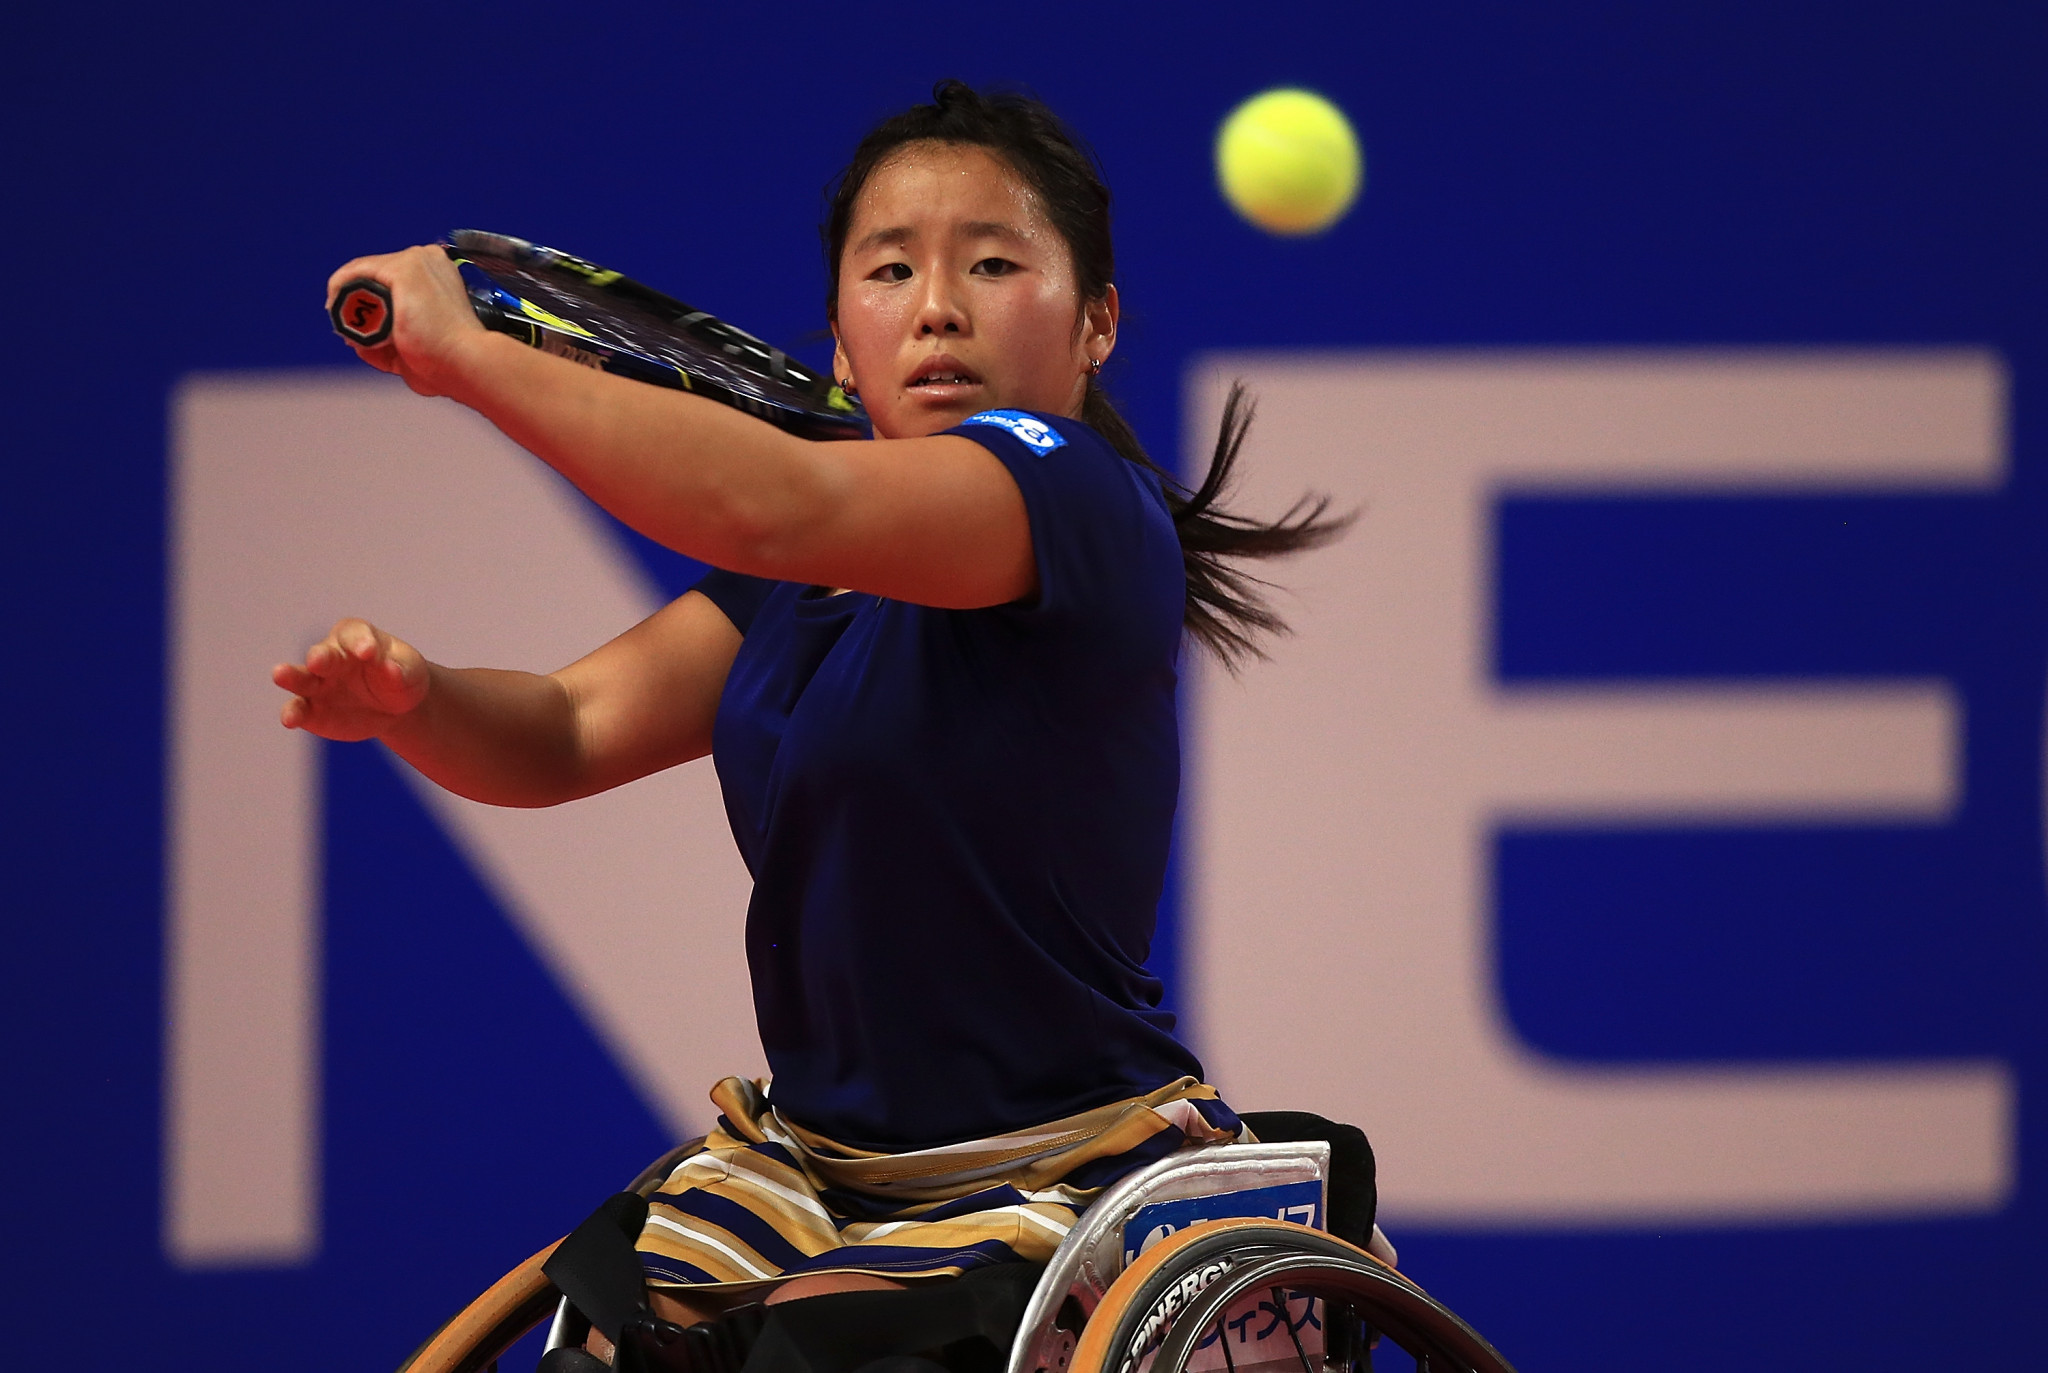 The NEC Wheelchair Tennis Masters event will be heading to the United States after previously being held in Great Britain ©Getty Images